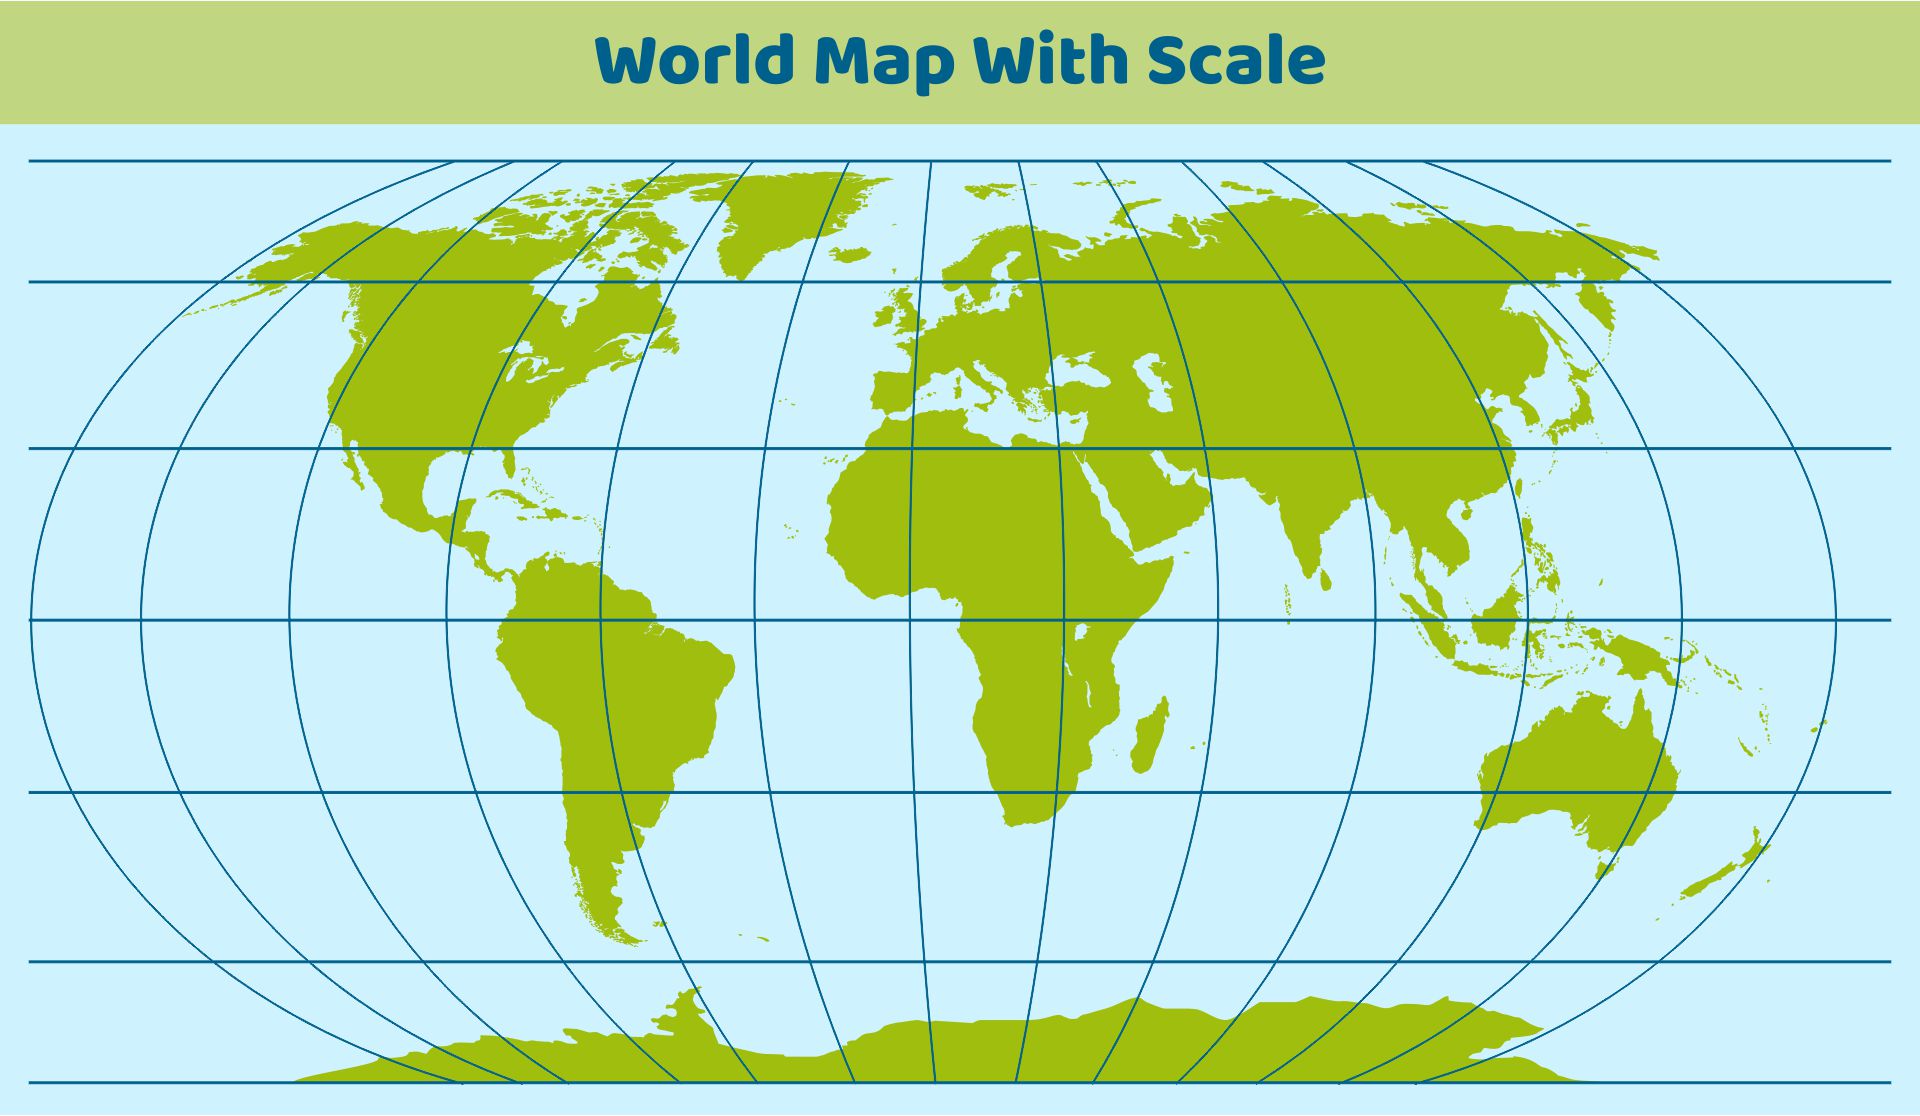 World Map with Scale